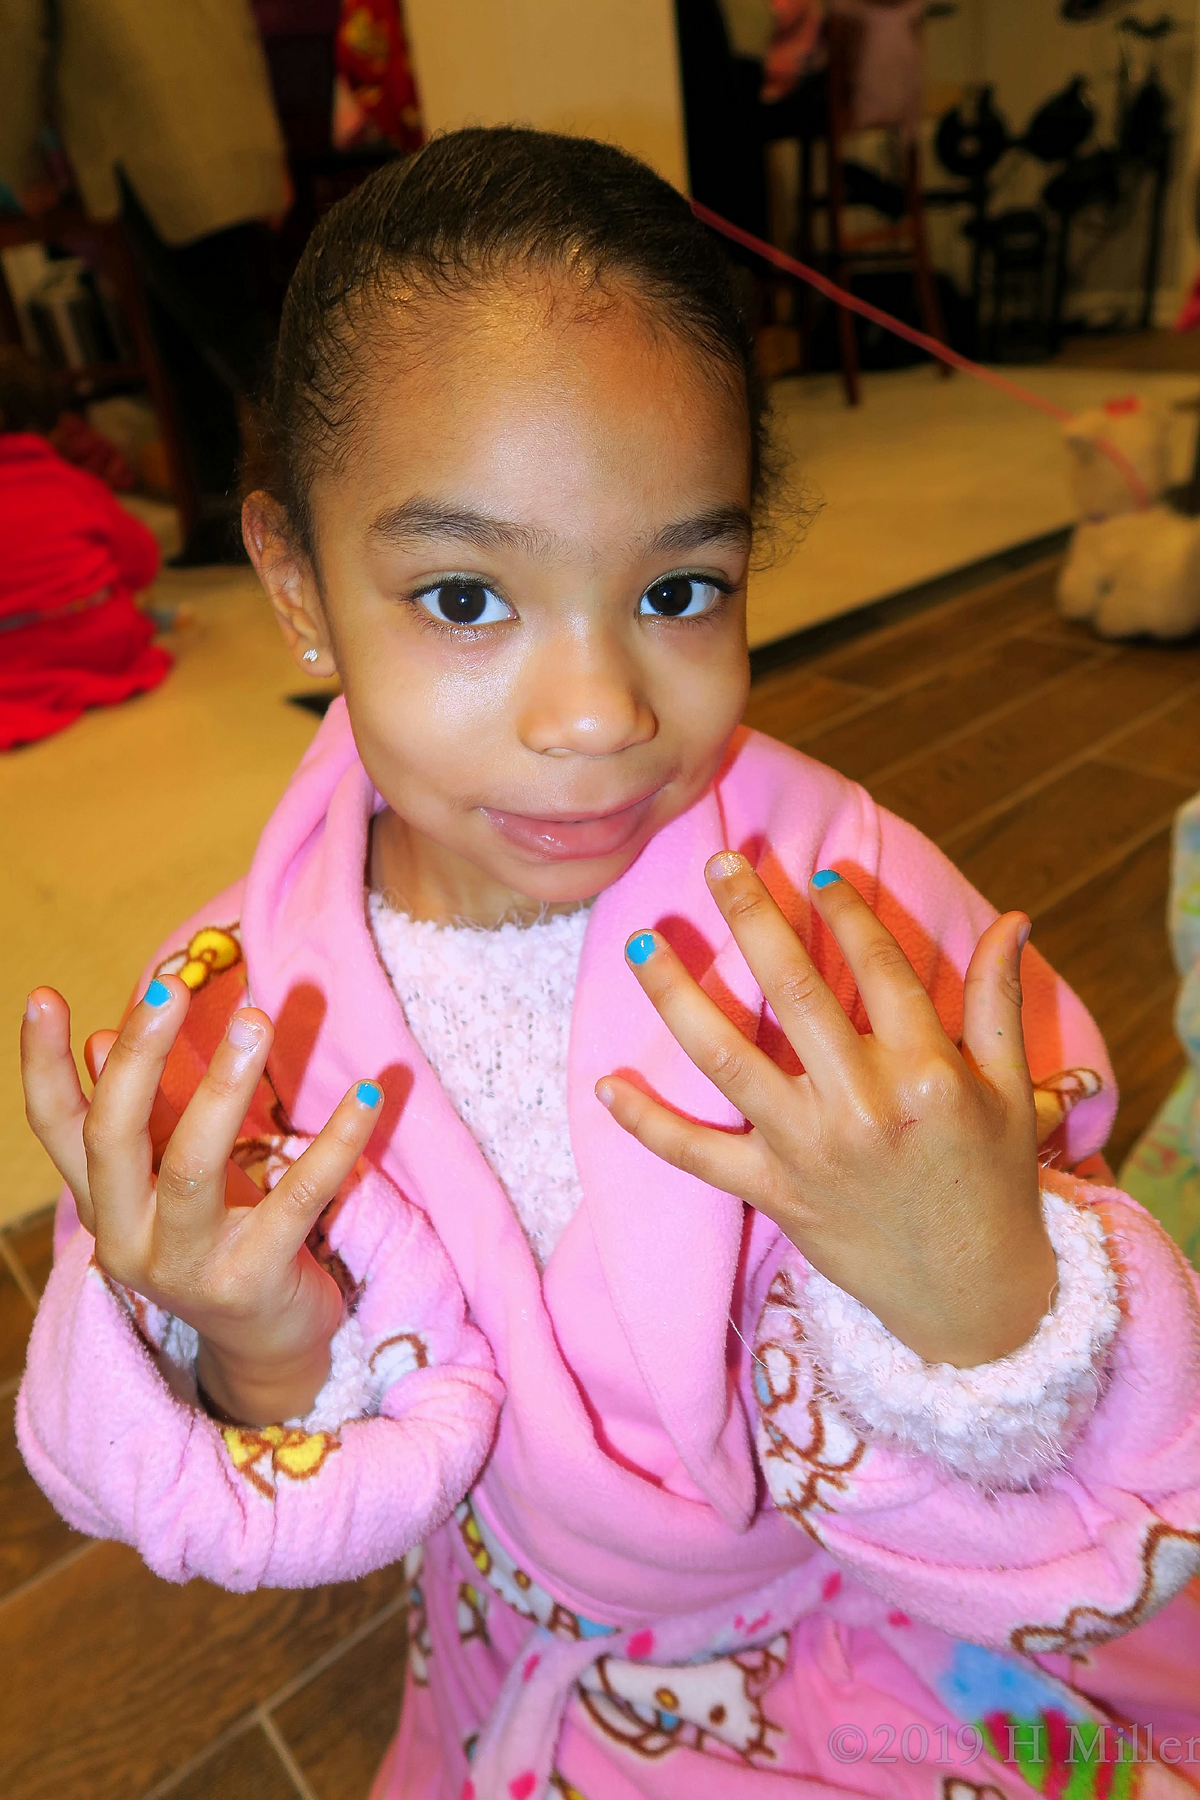 Excited To Have Her Cute Kids Manicure 